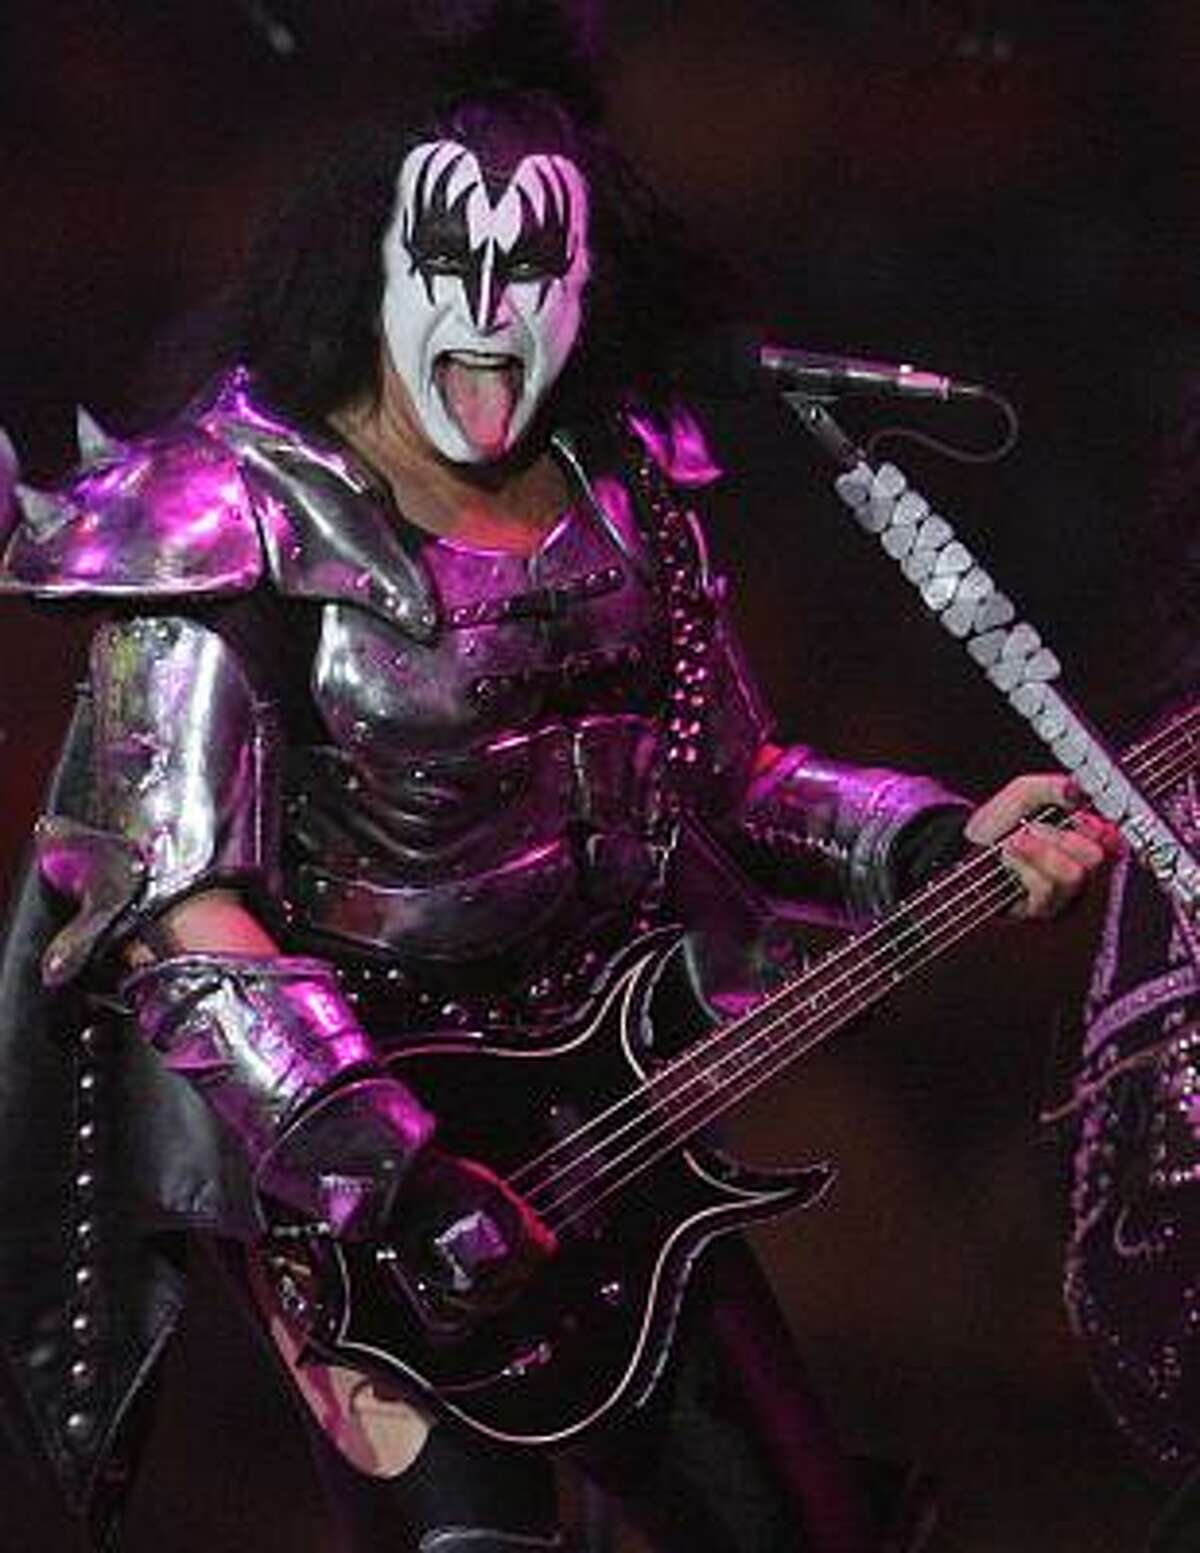 Believe it or not, Gene Simmons was very briefly a public school teacher in New York City...he didn't even last a year.